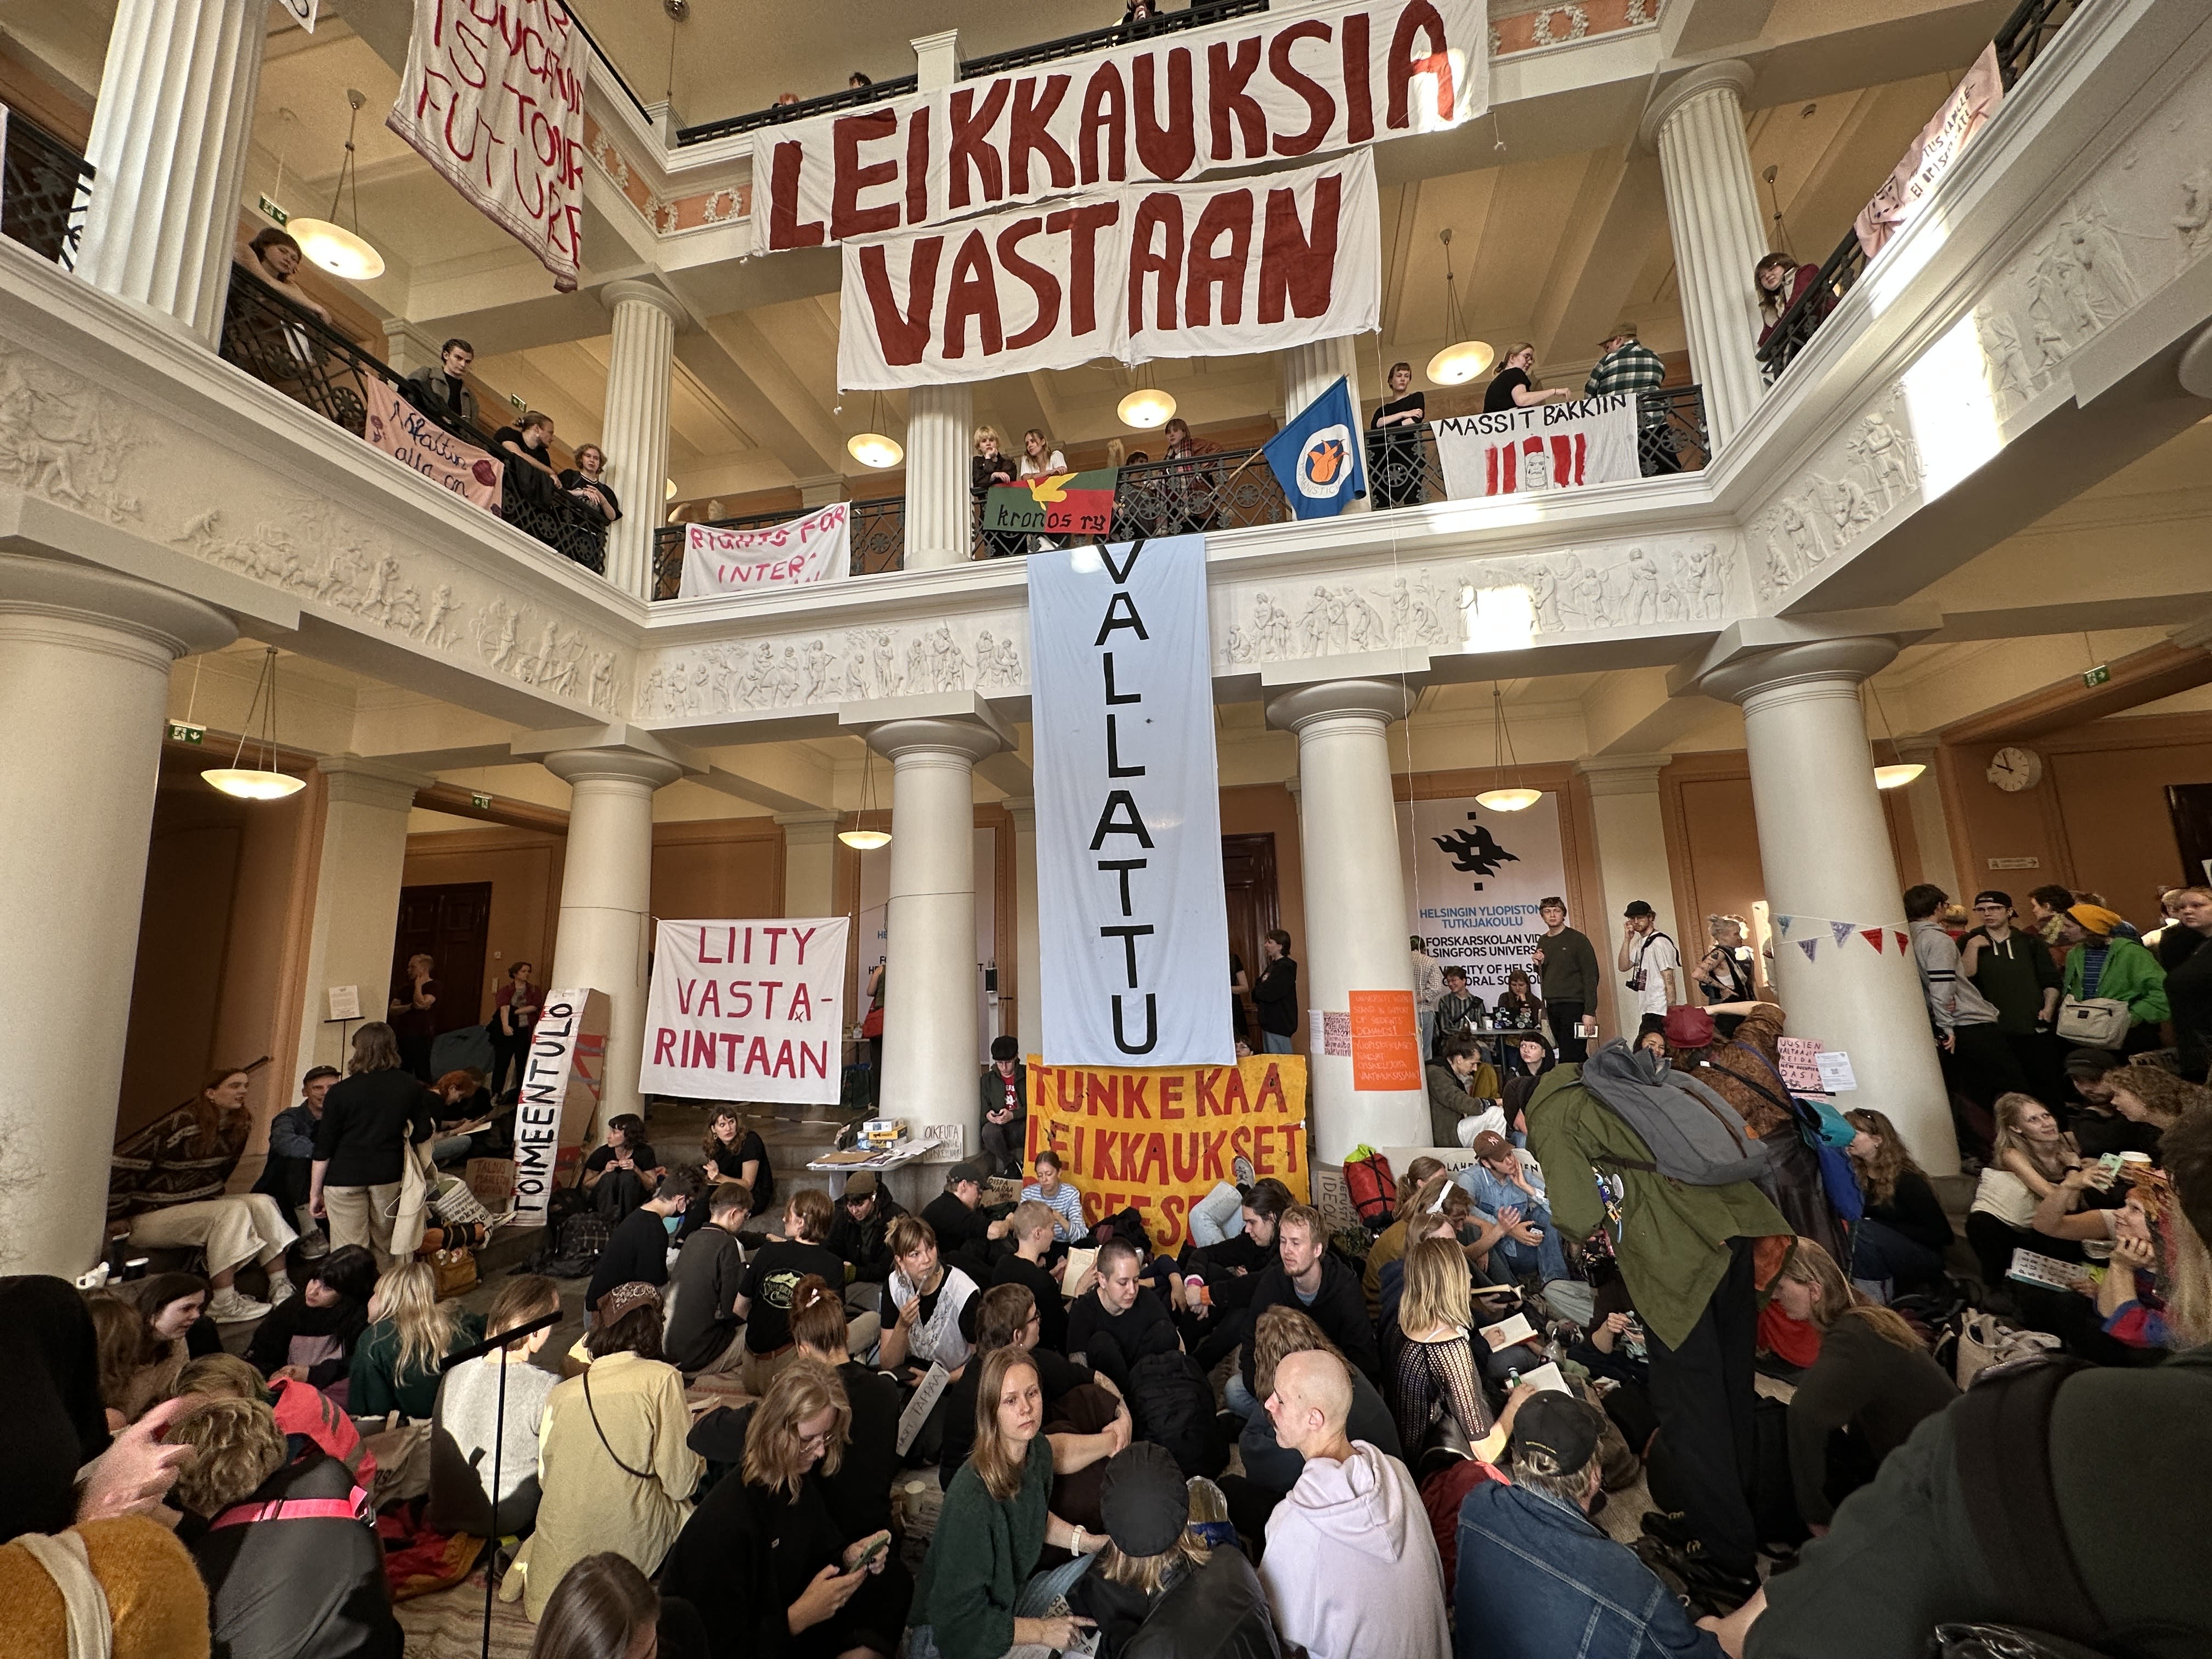 The occupiers of the University of Helsinki will remain in place until the president’s arrival at the defense event